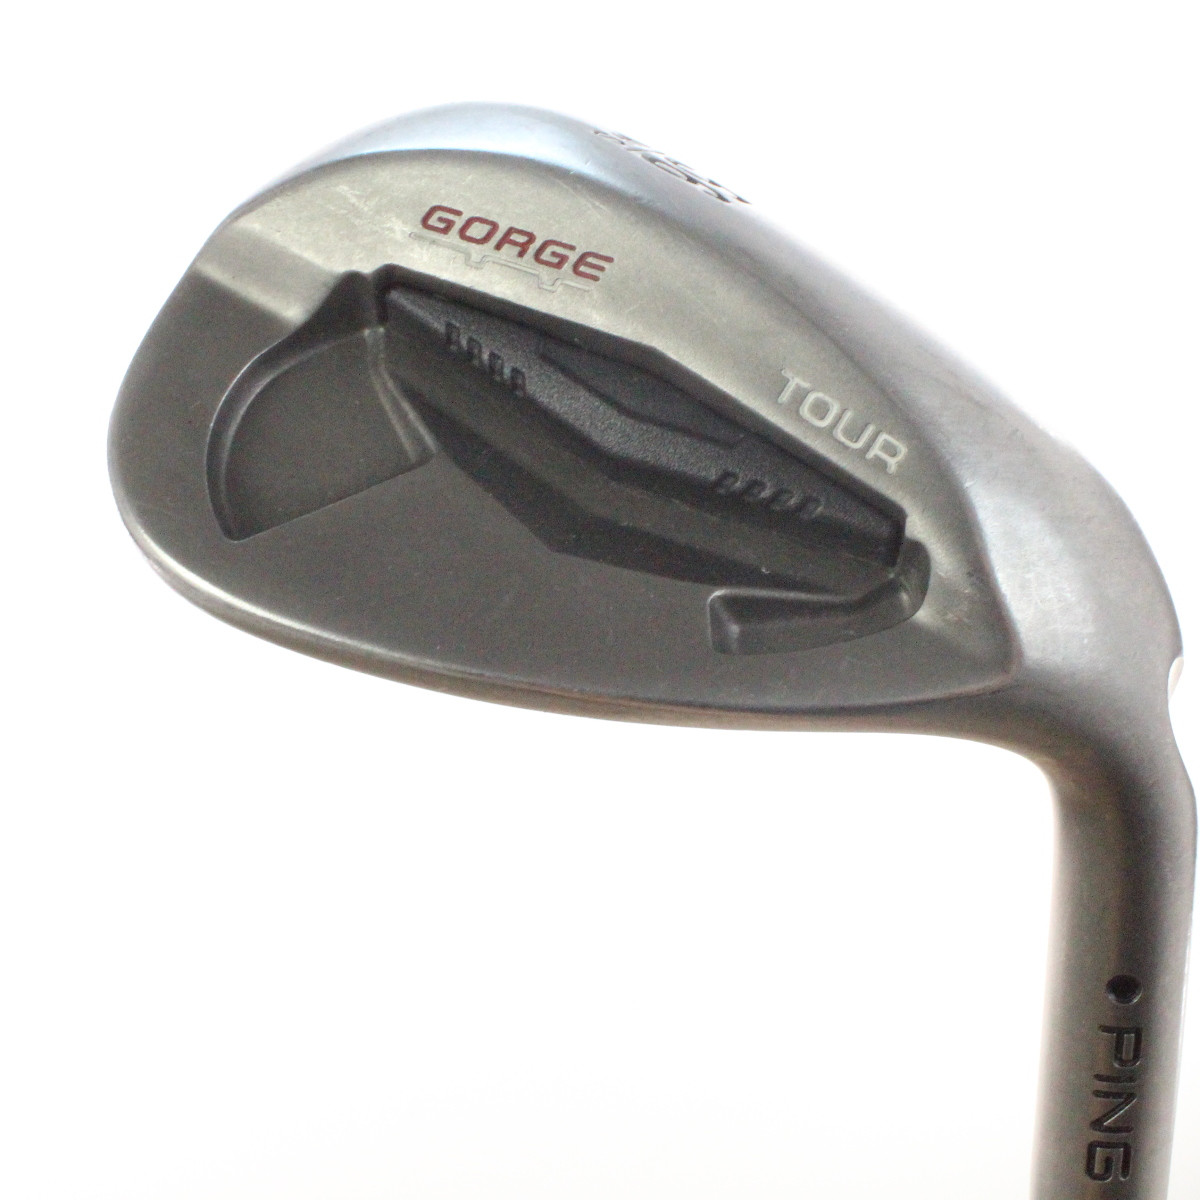 ping gorge tour wedge review